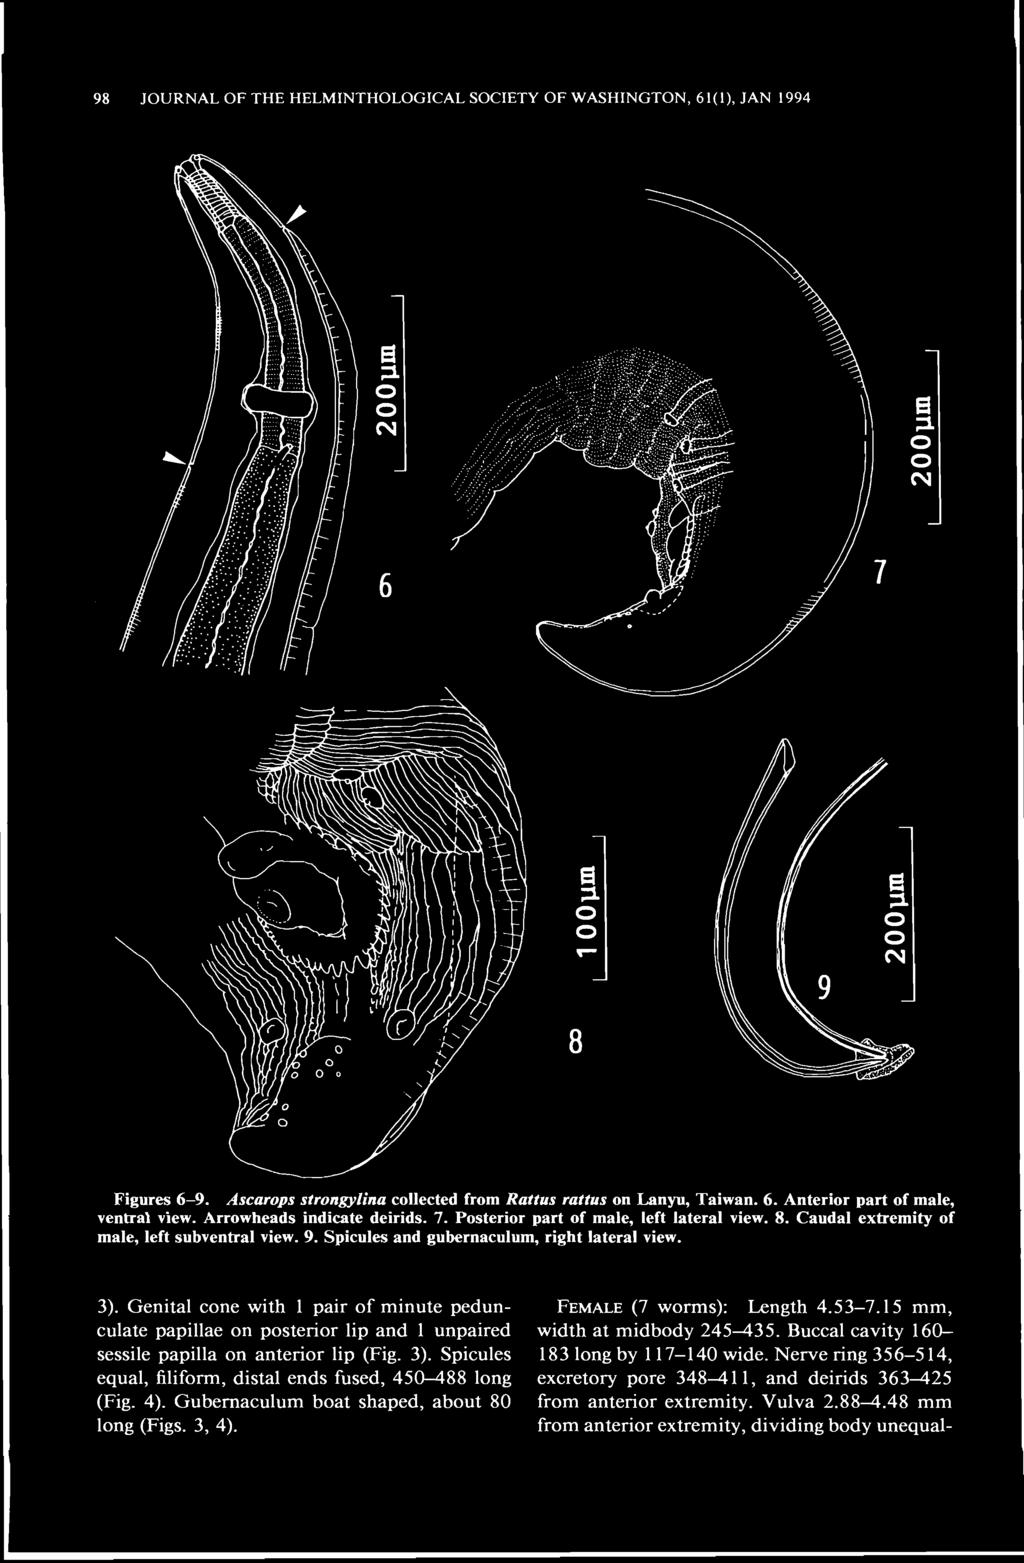 98 JOURNAL OF THE HELMINTHOLOGICAL SOCIETY OF WASHINGTON, 61(1), JAN 1994 iiiiiiif Figures 6-9. Ascarops strongylina collected from Rattus rattus on Lanyu, Taiwan. 6. Anterior part of male, ventral view.